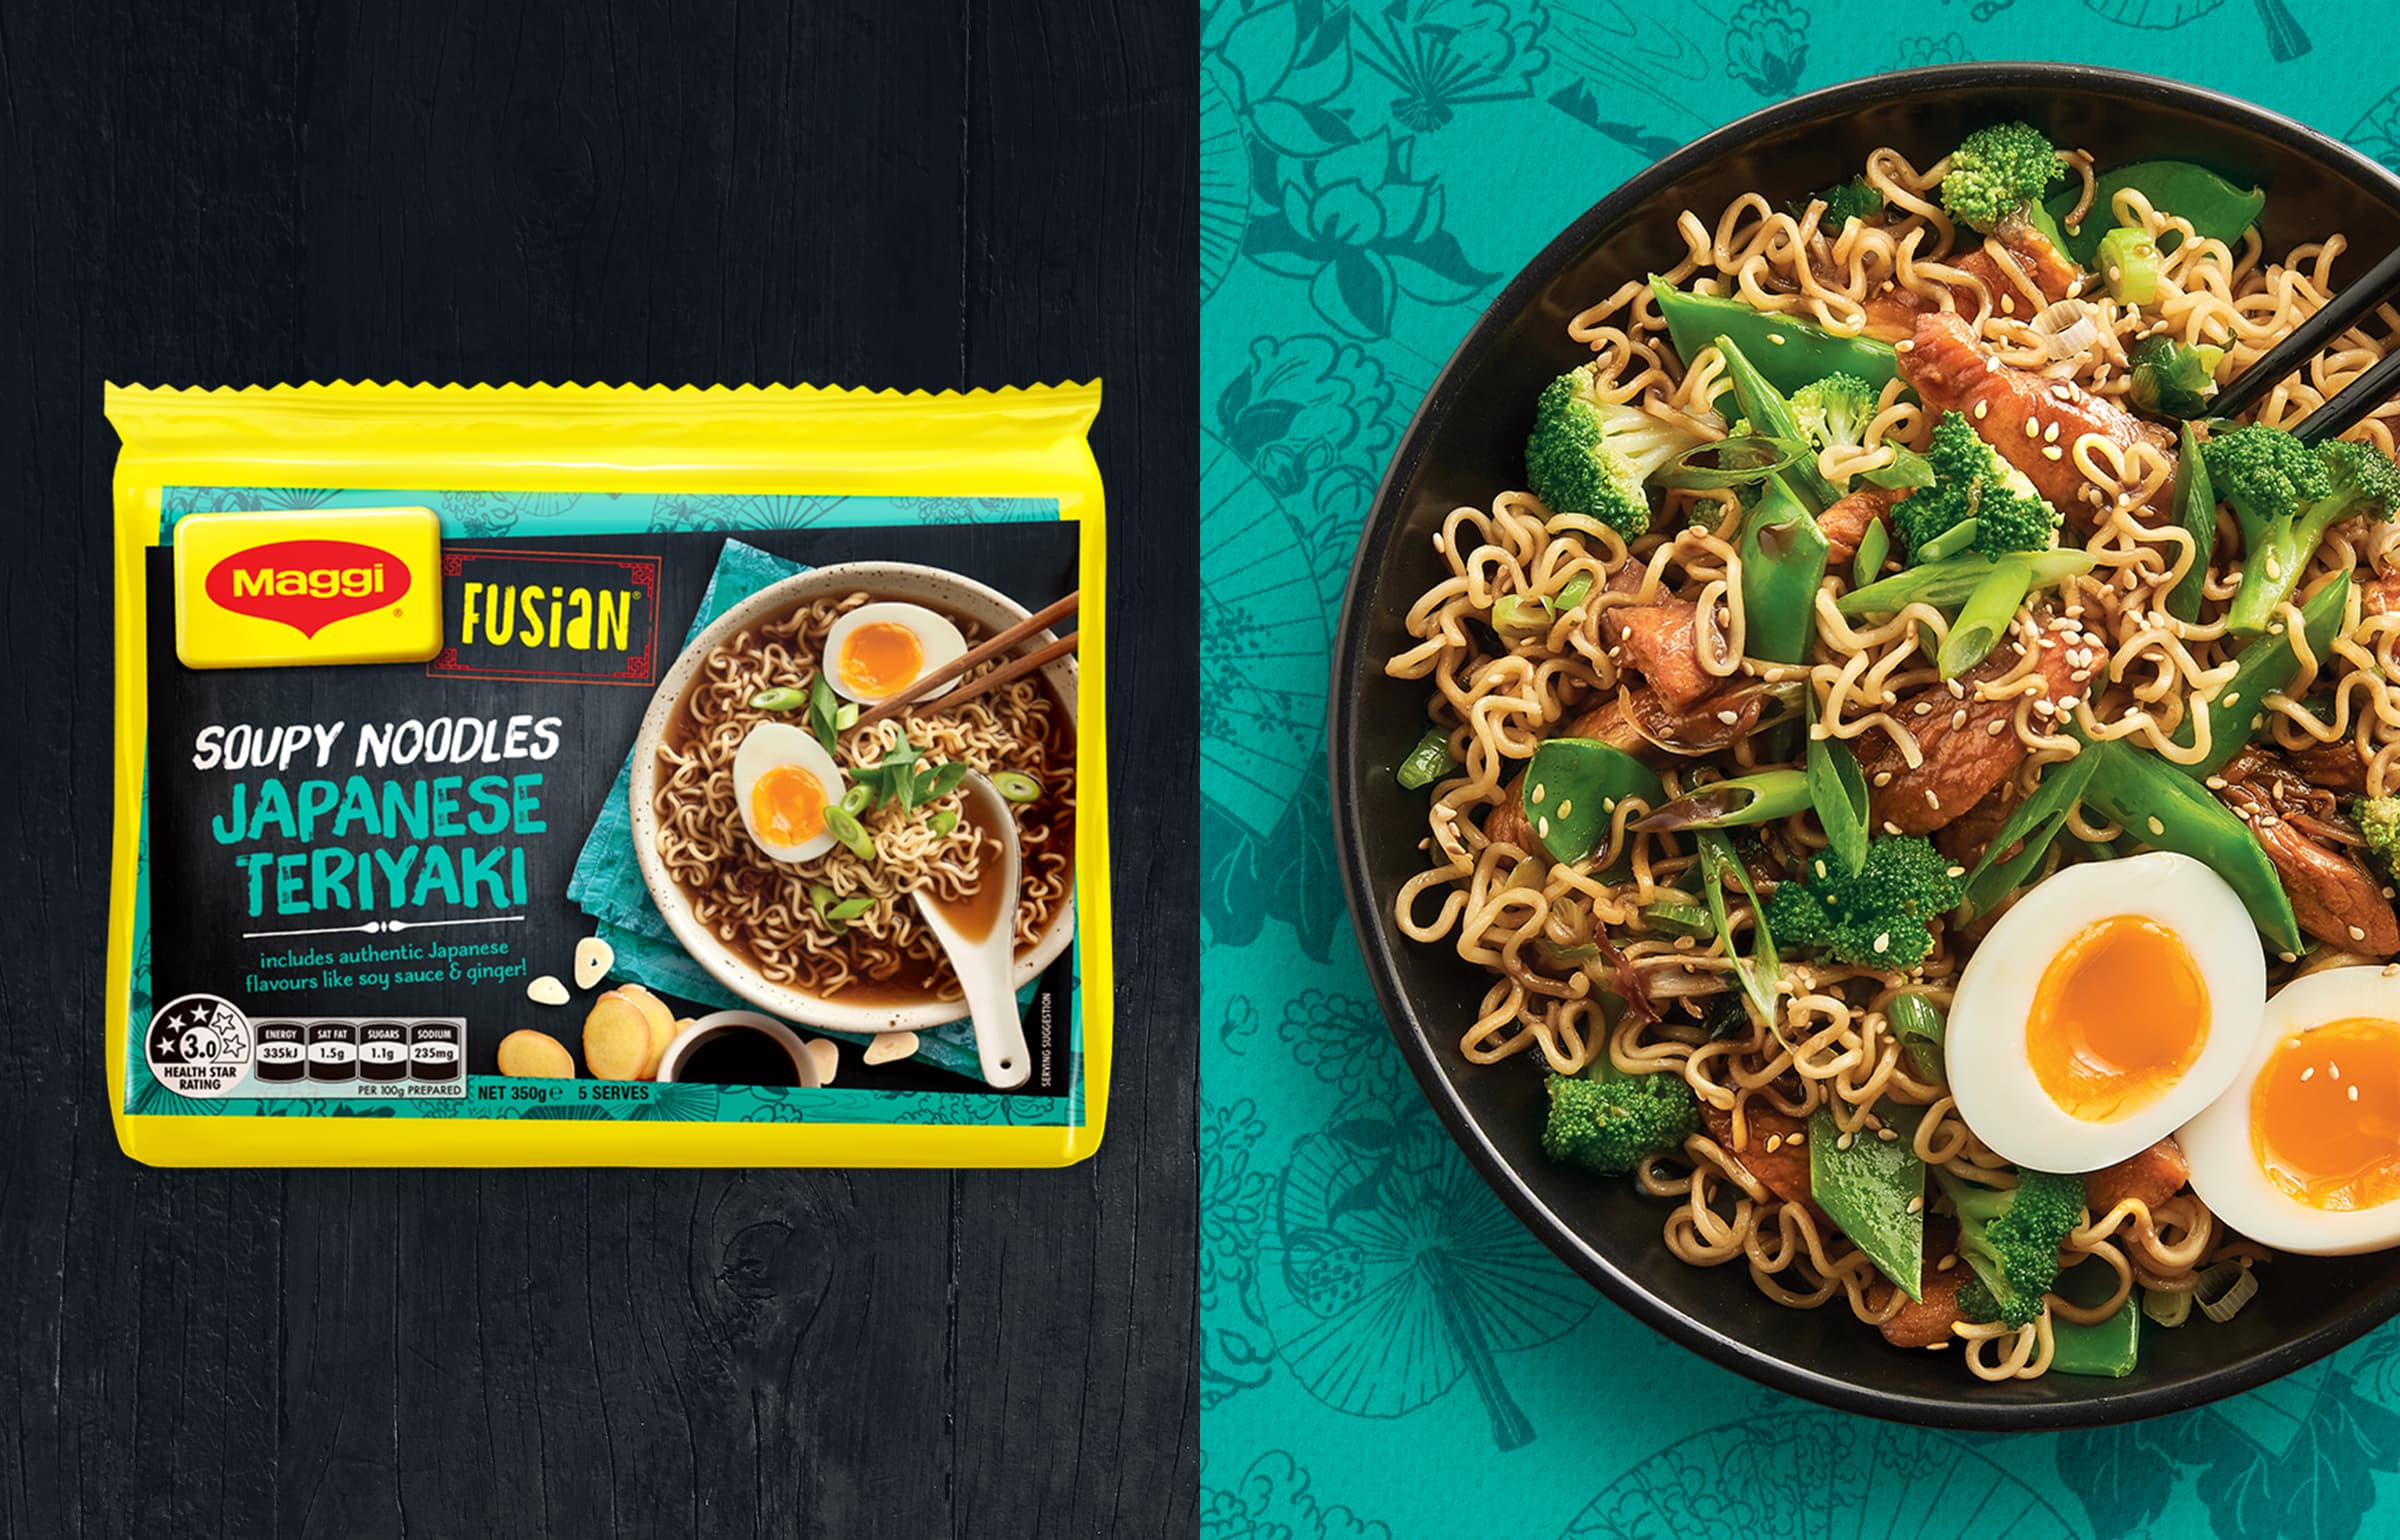 boxer-and-co-maggi-soupy-noodles-japanese-teriyaki-authentic-eggs-broccoli-packaging-design-patterns-blue